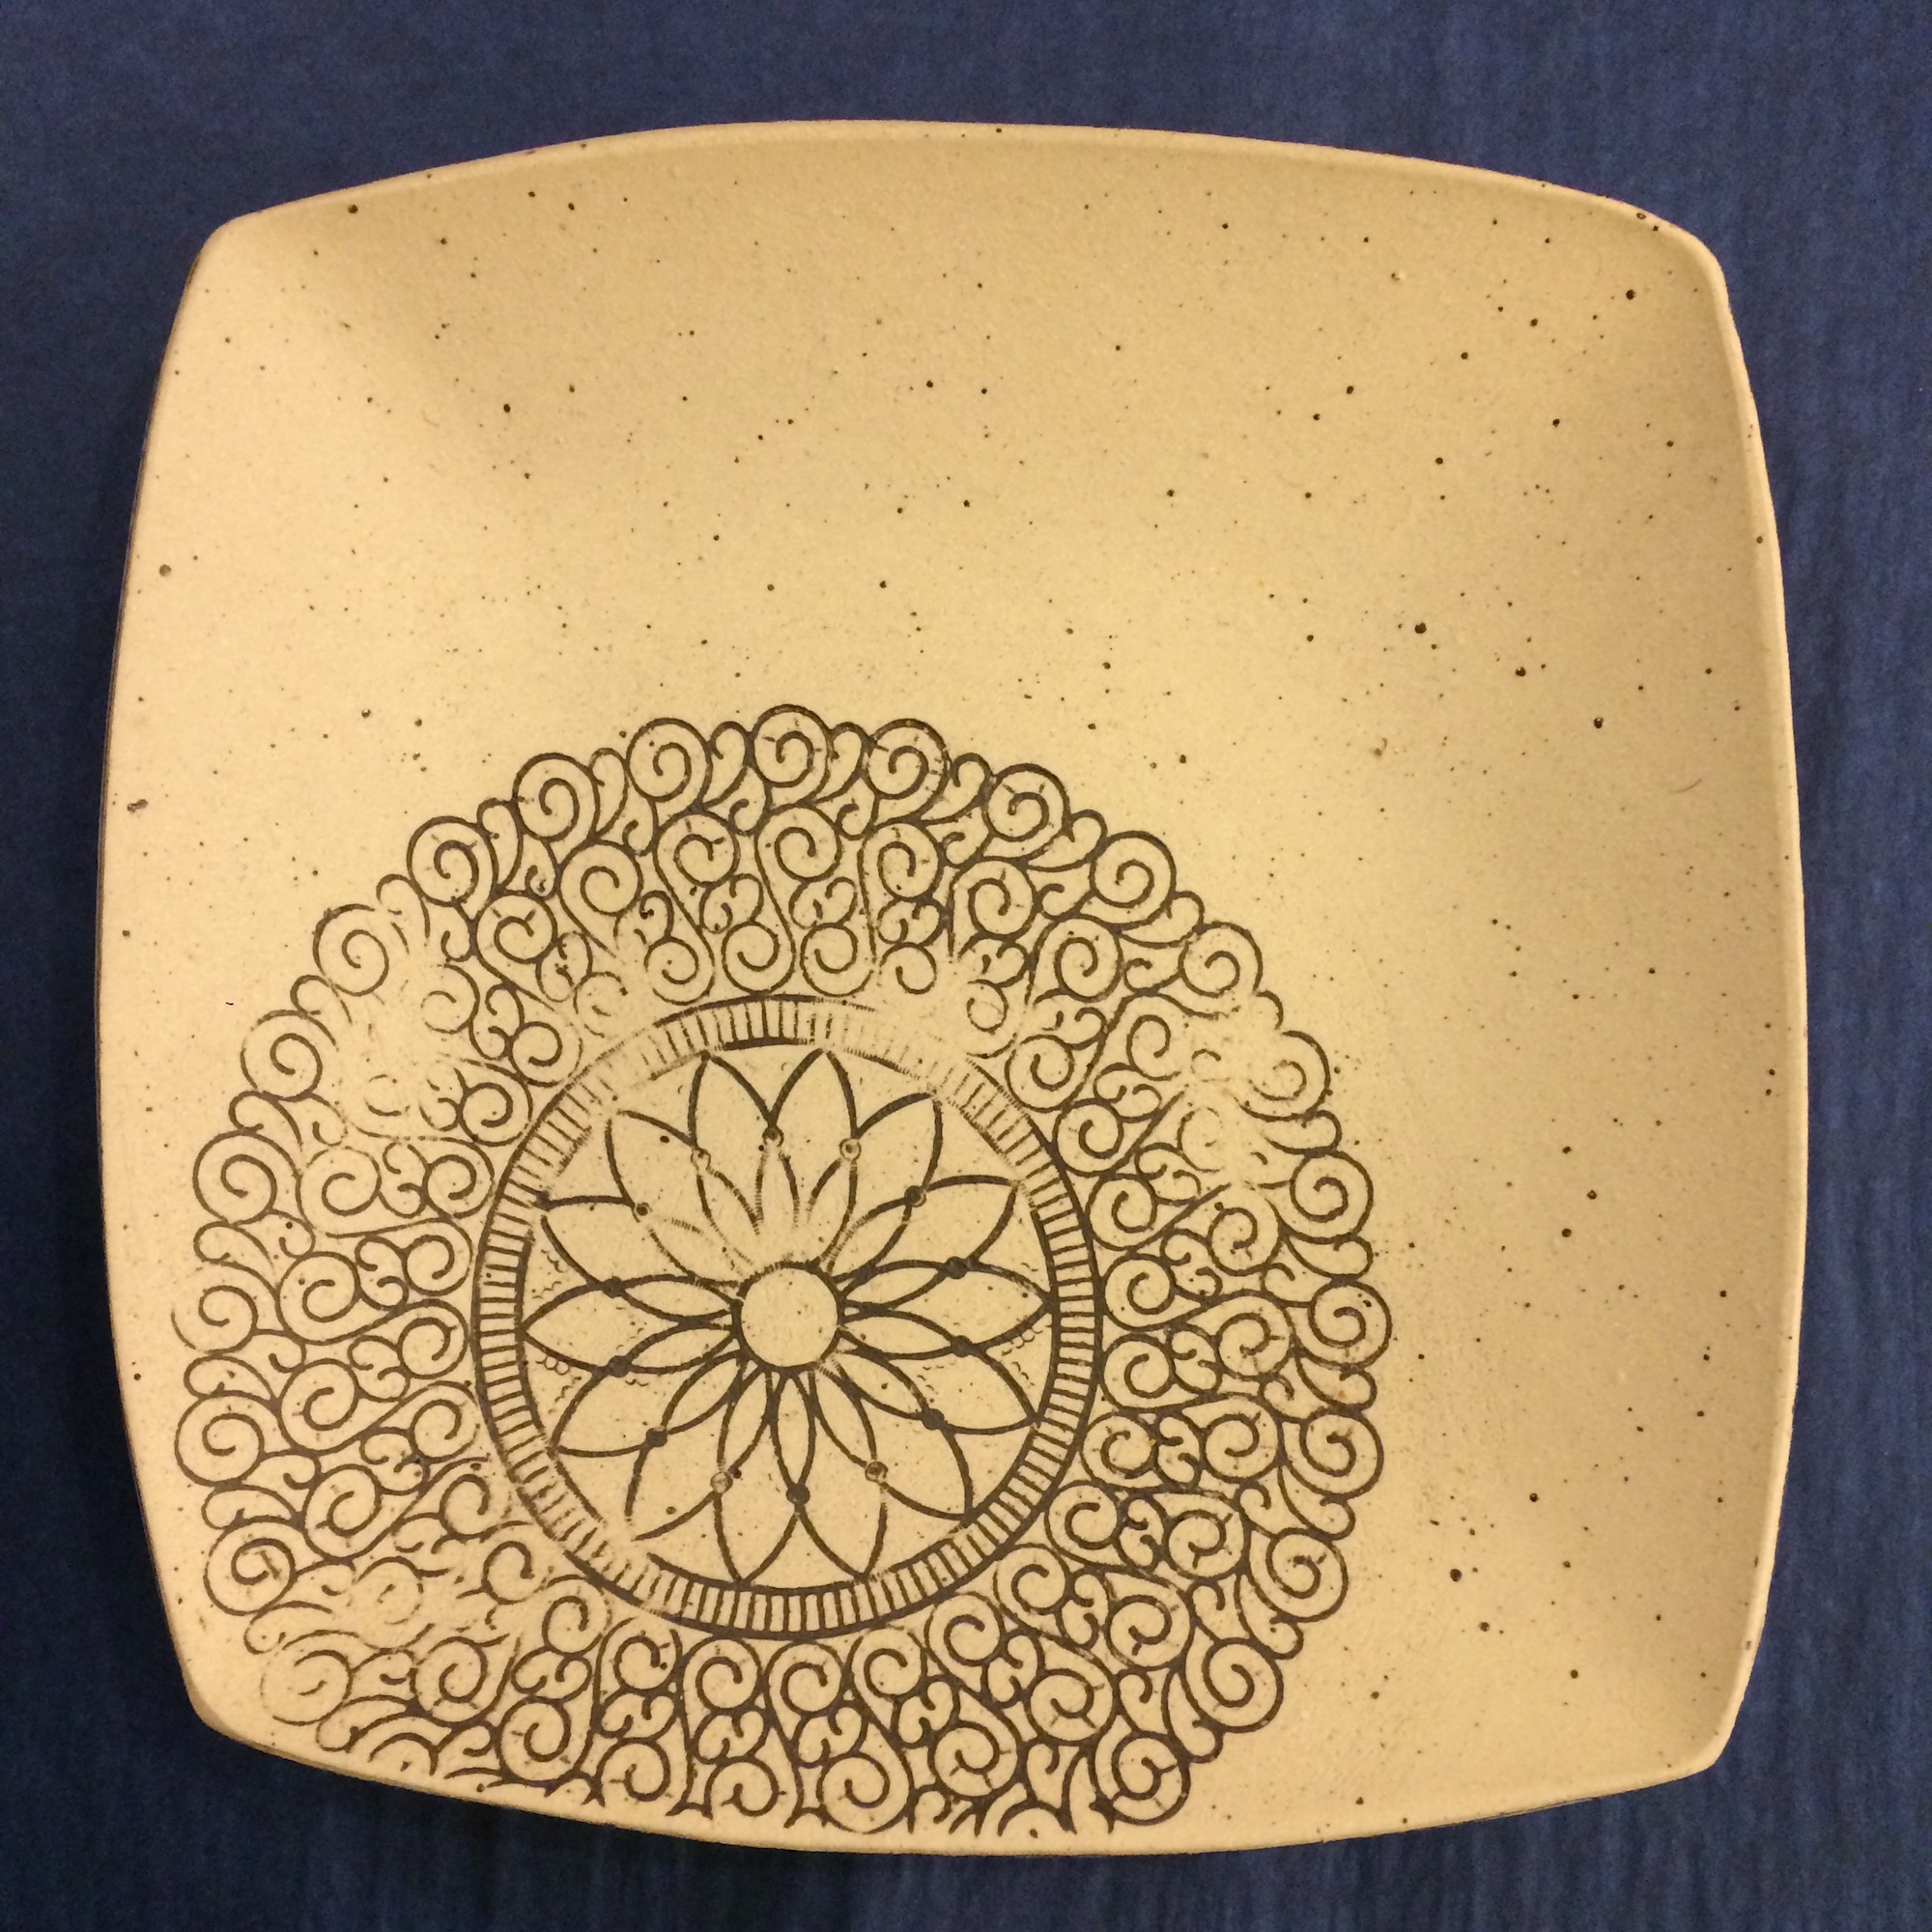 Square Stoneware Platter by Fiona Veacock - Sale!